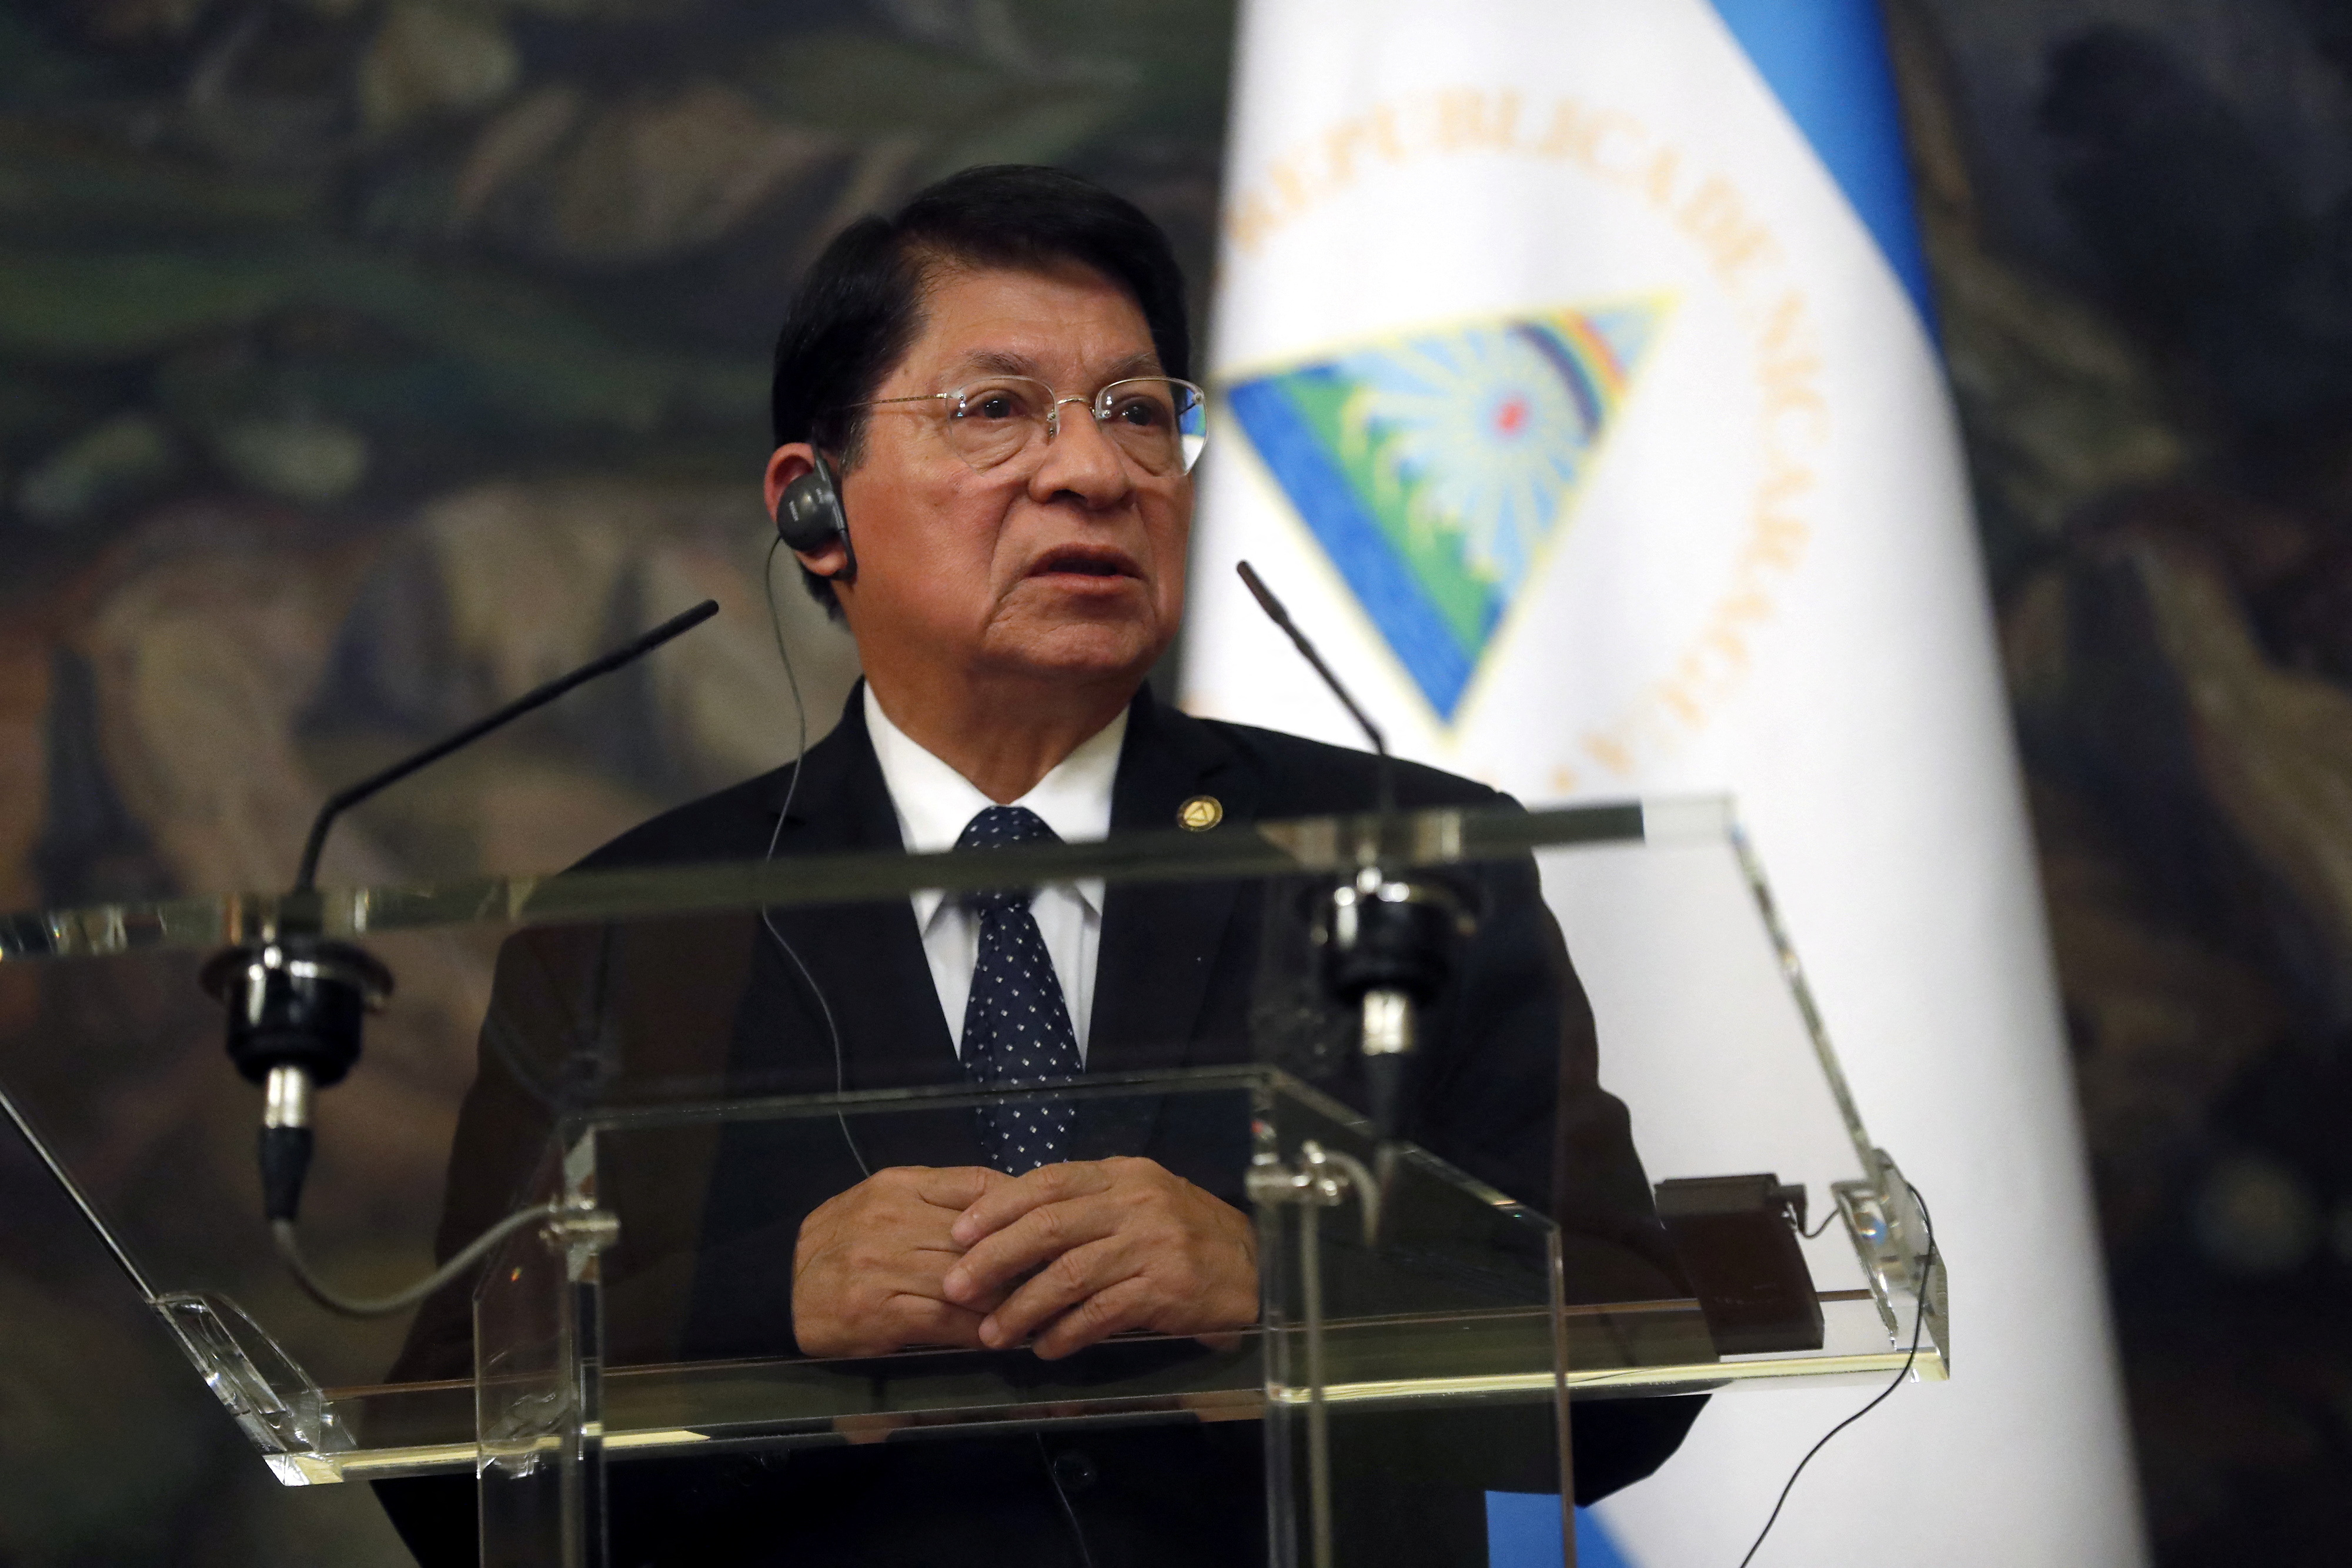 Nicaragua responded by means of a letter addressed to the EU Foreign Affairs Office, assuring that 